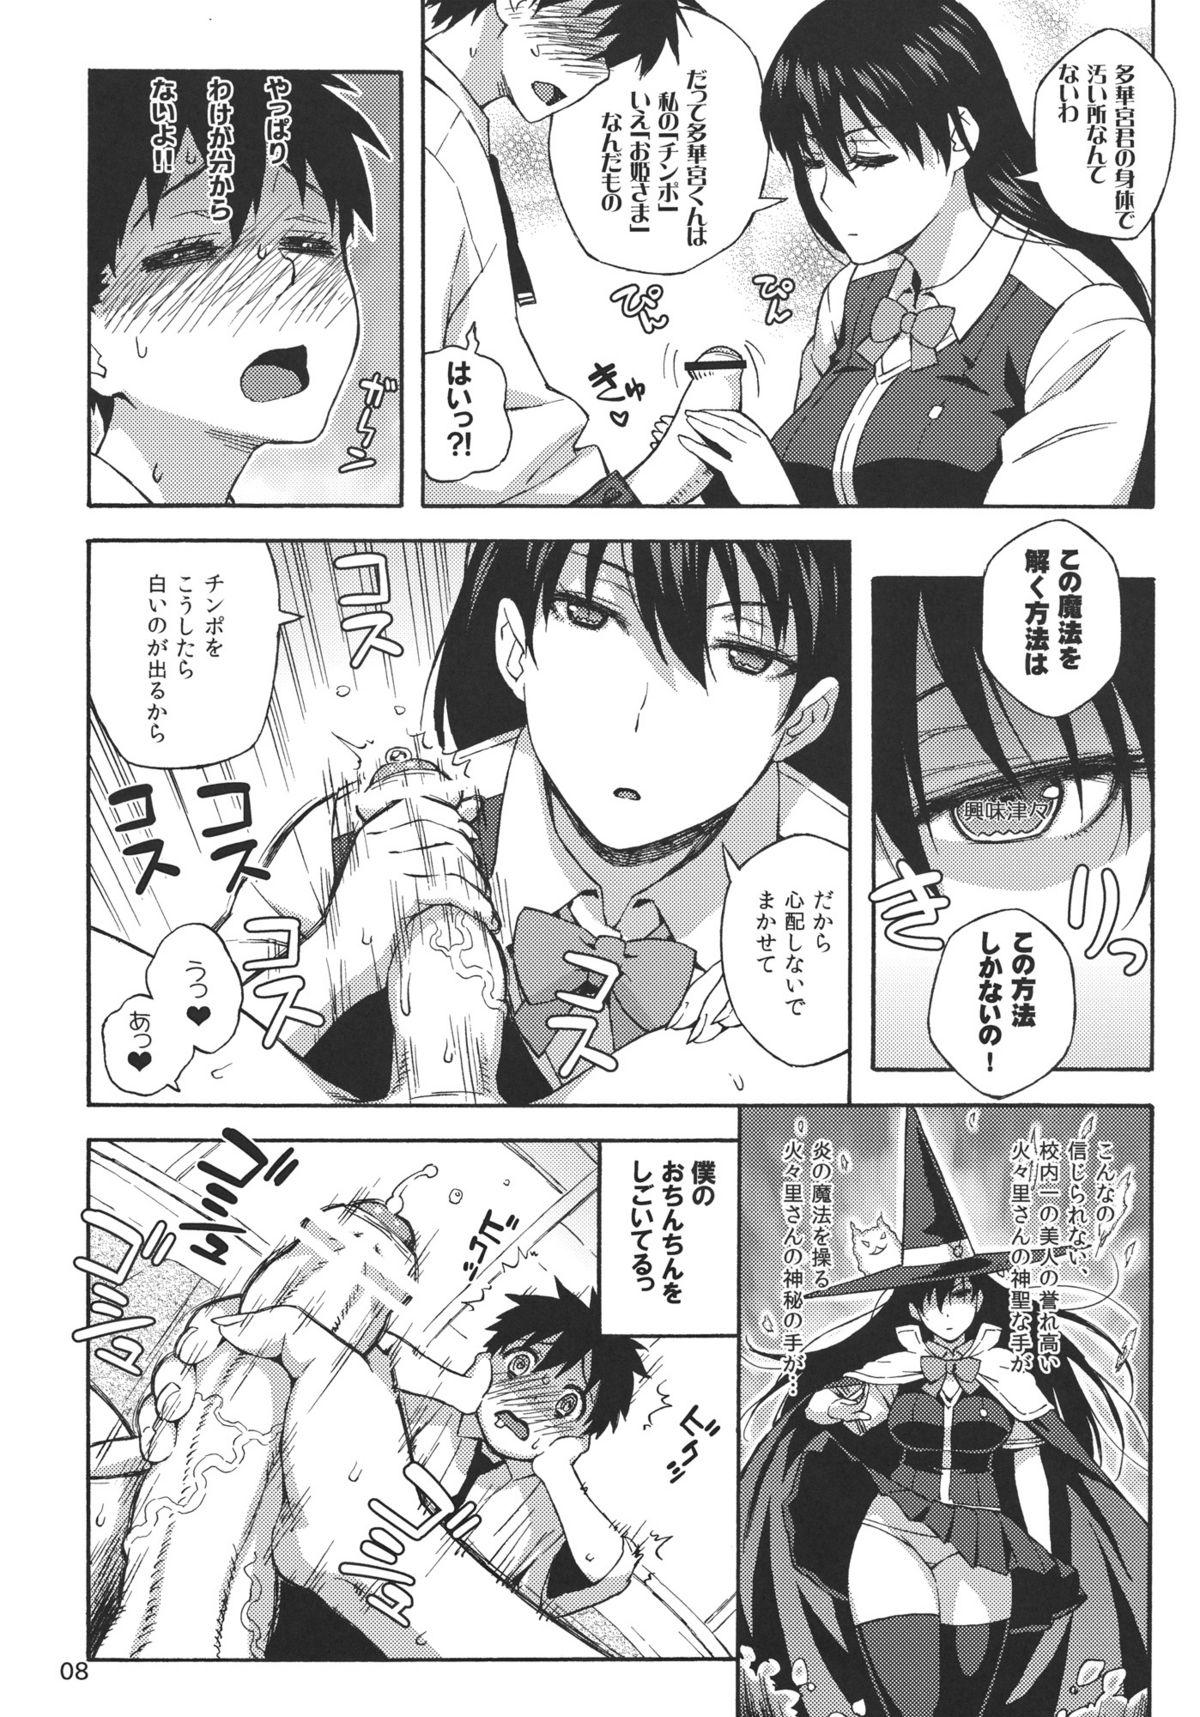 Ex Girlfriends Kagari-san ni Omakase - Witch craft works Trimmed - Page 7